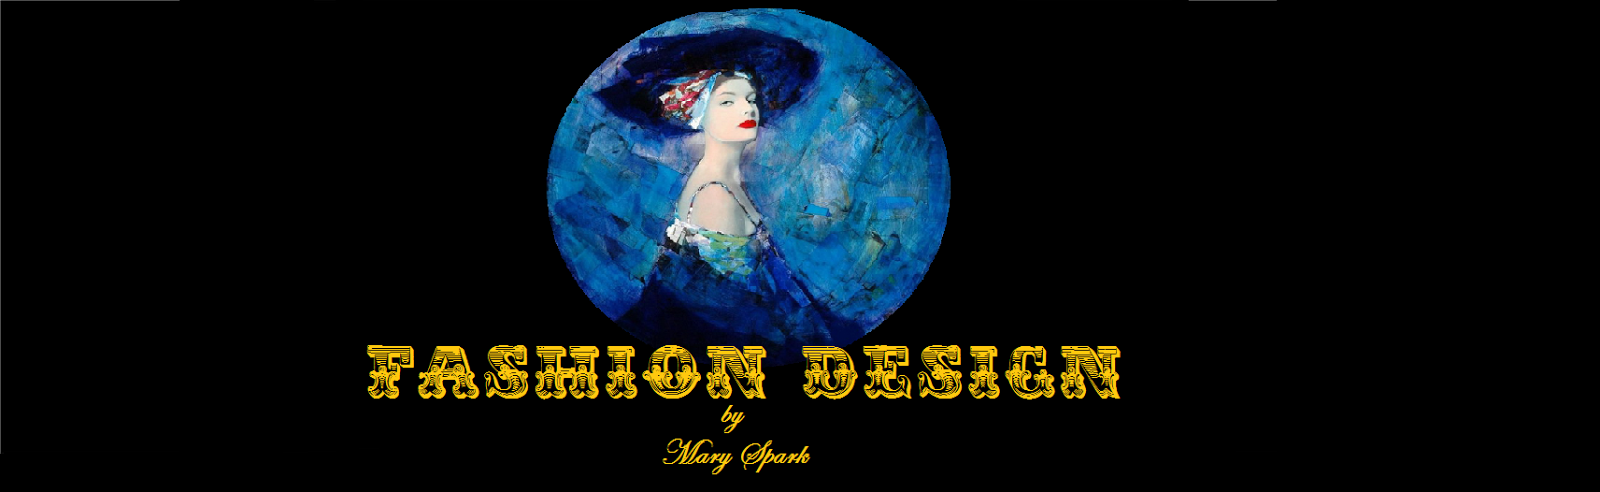  FASHION DESIGN by Mary Spark